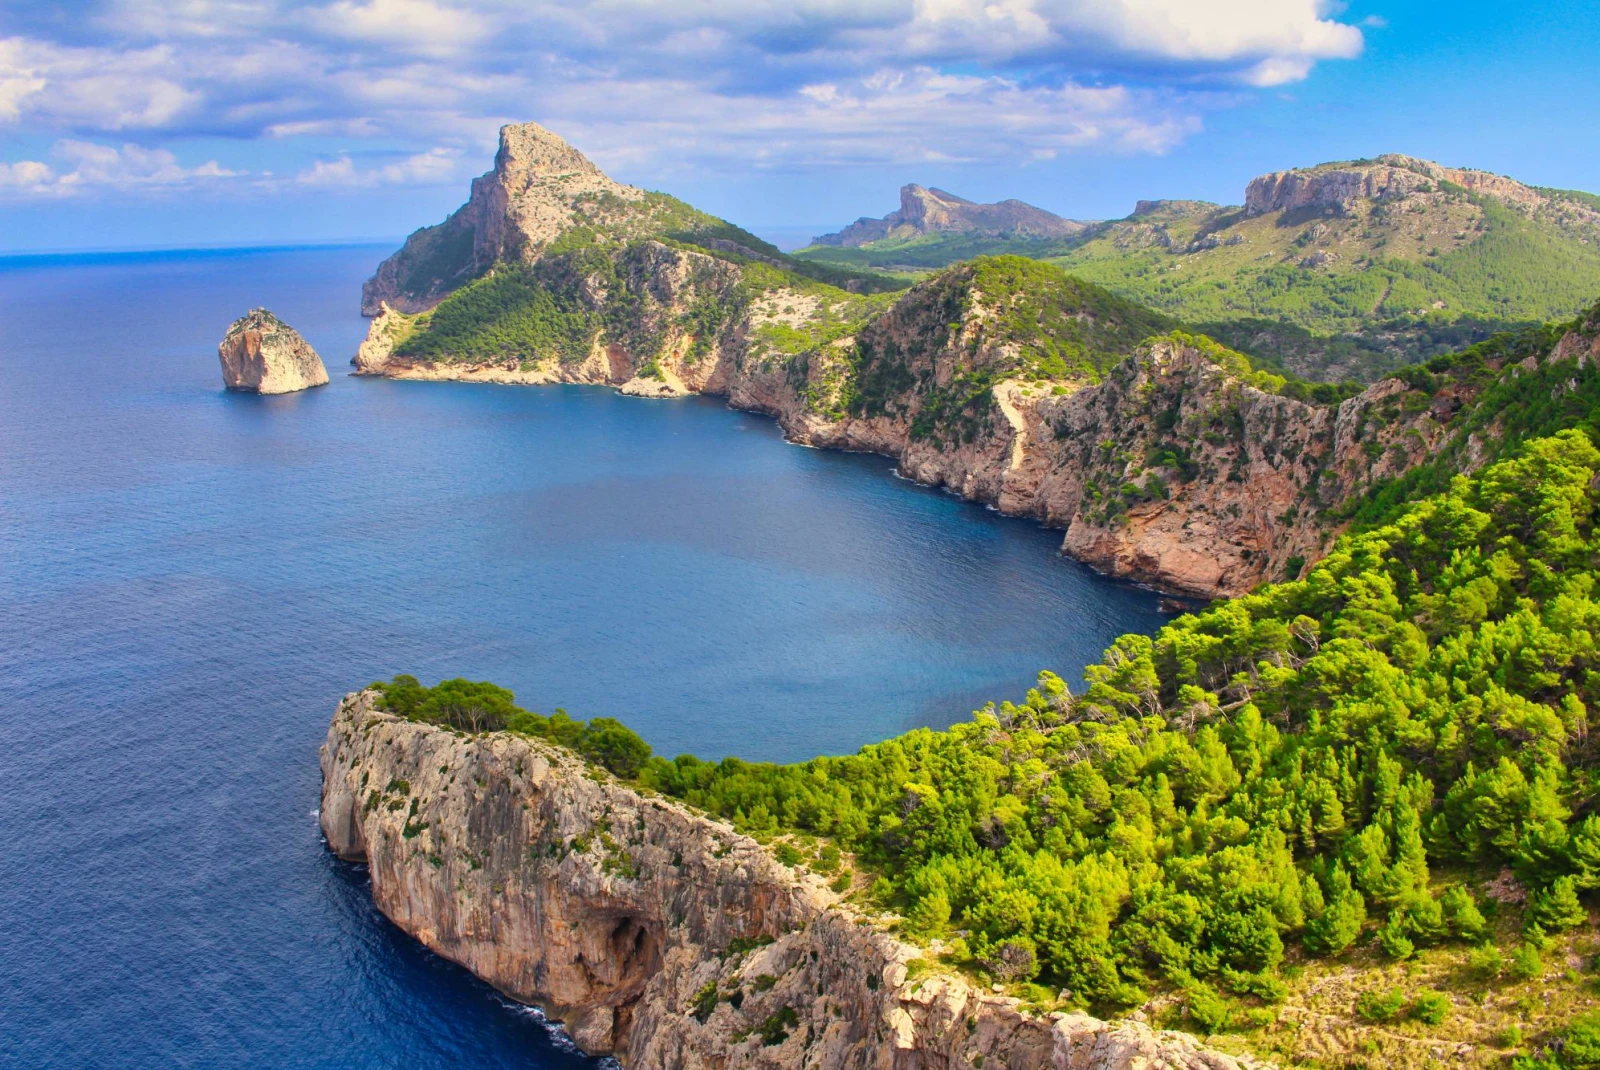 Lush greenery on rocks of island beside blue ocean in Mallorca on a sunny day.